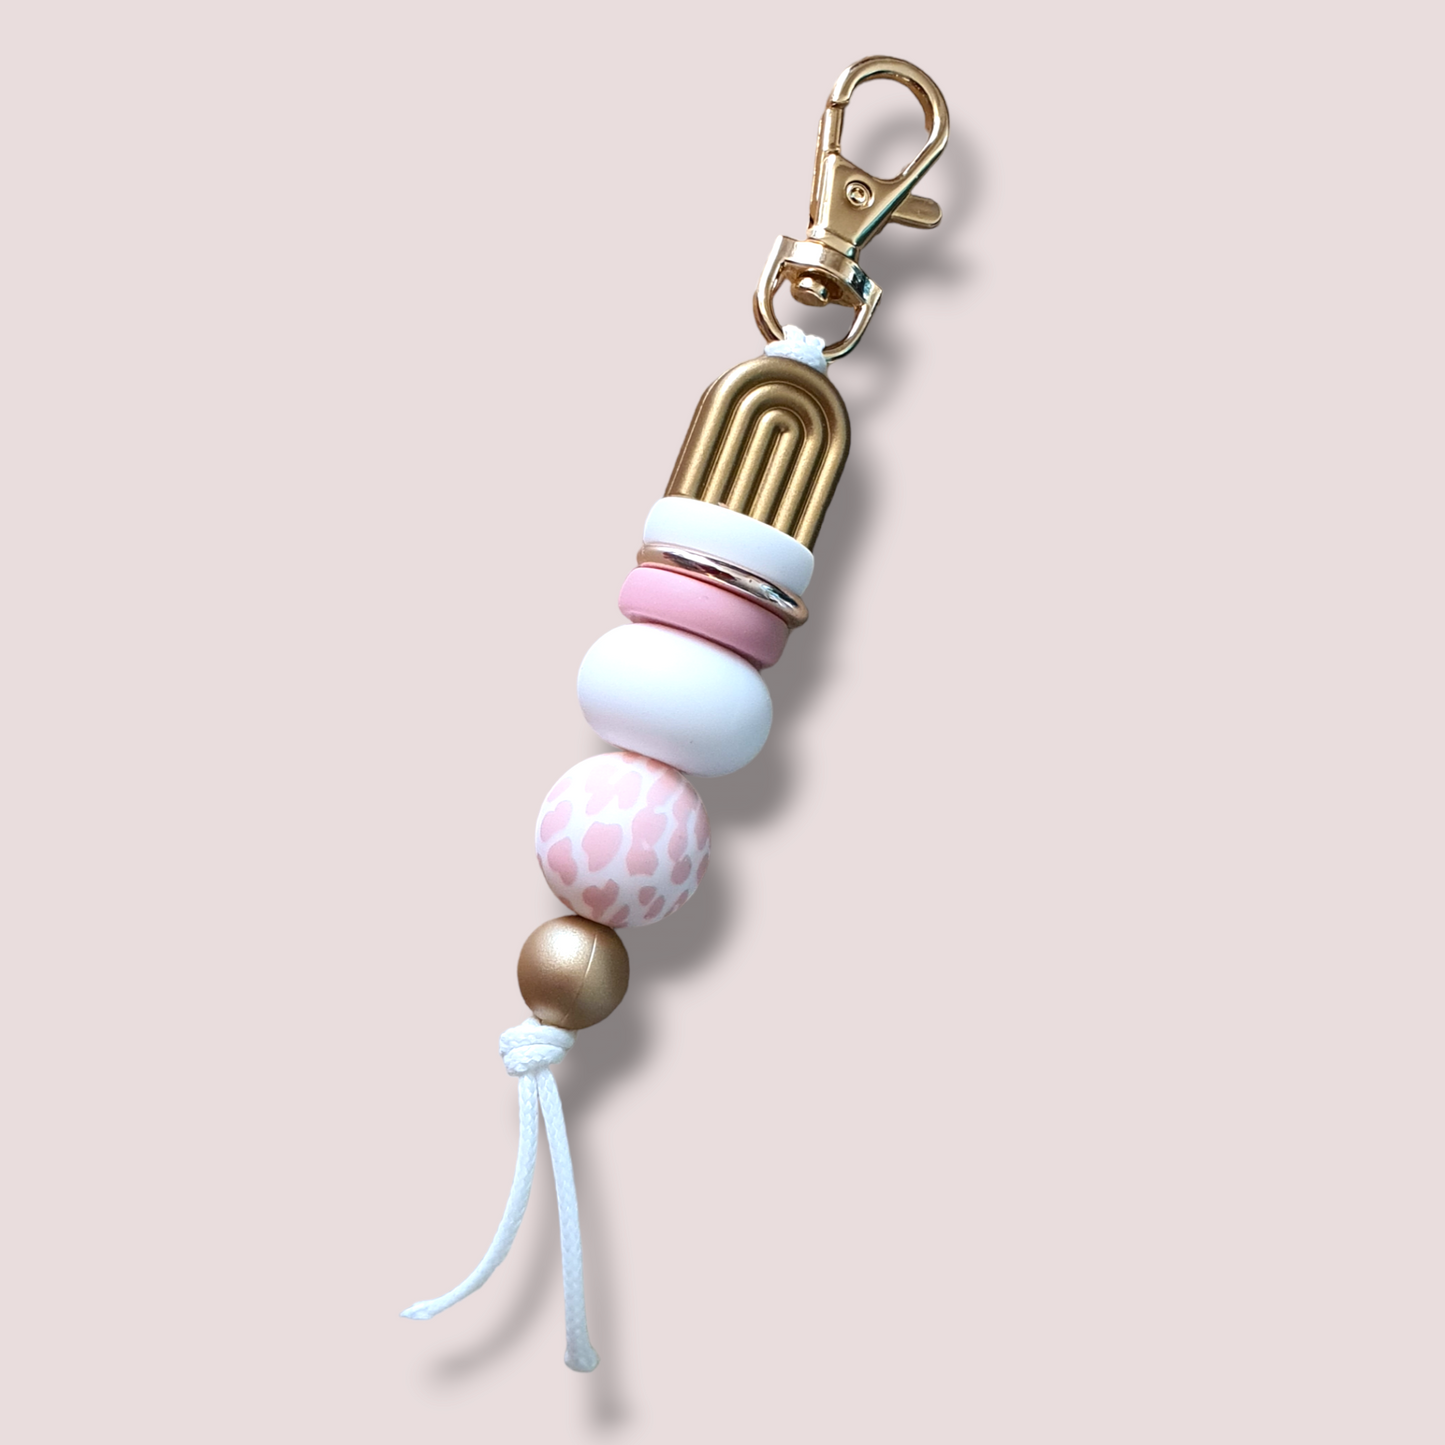 Blush pink cow pirnt and gold keyring featuring tones of white pink and gold